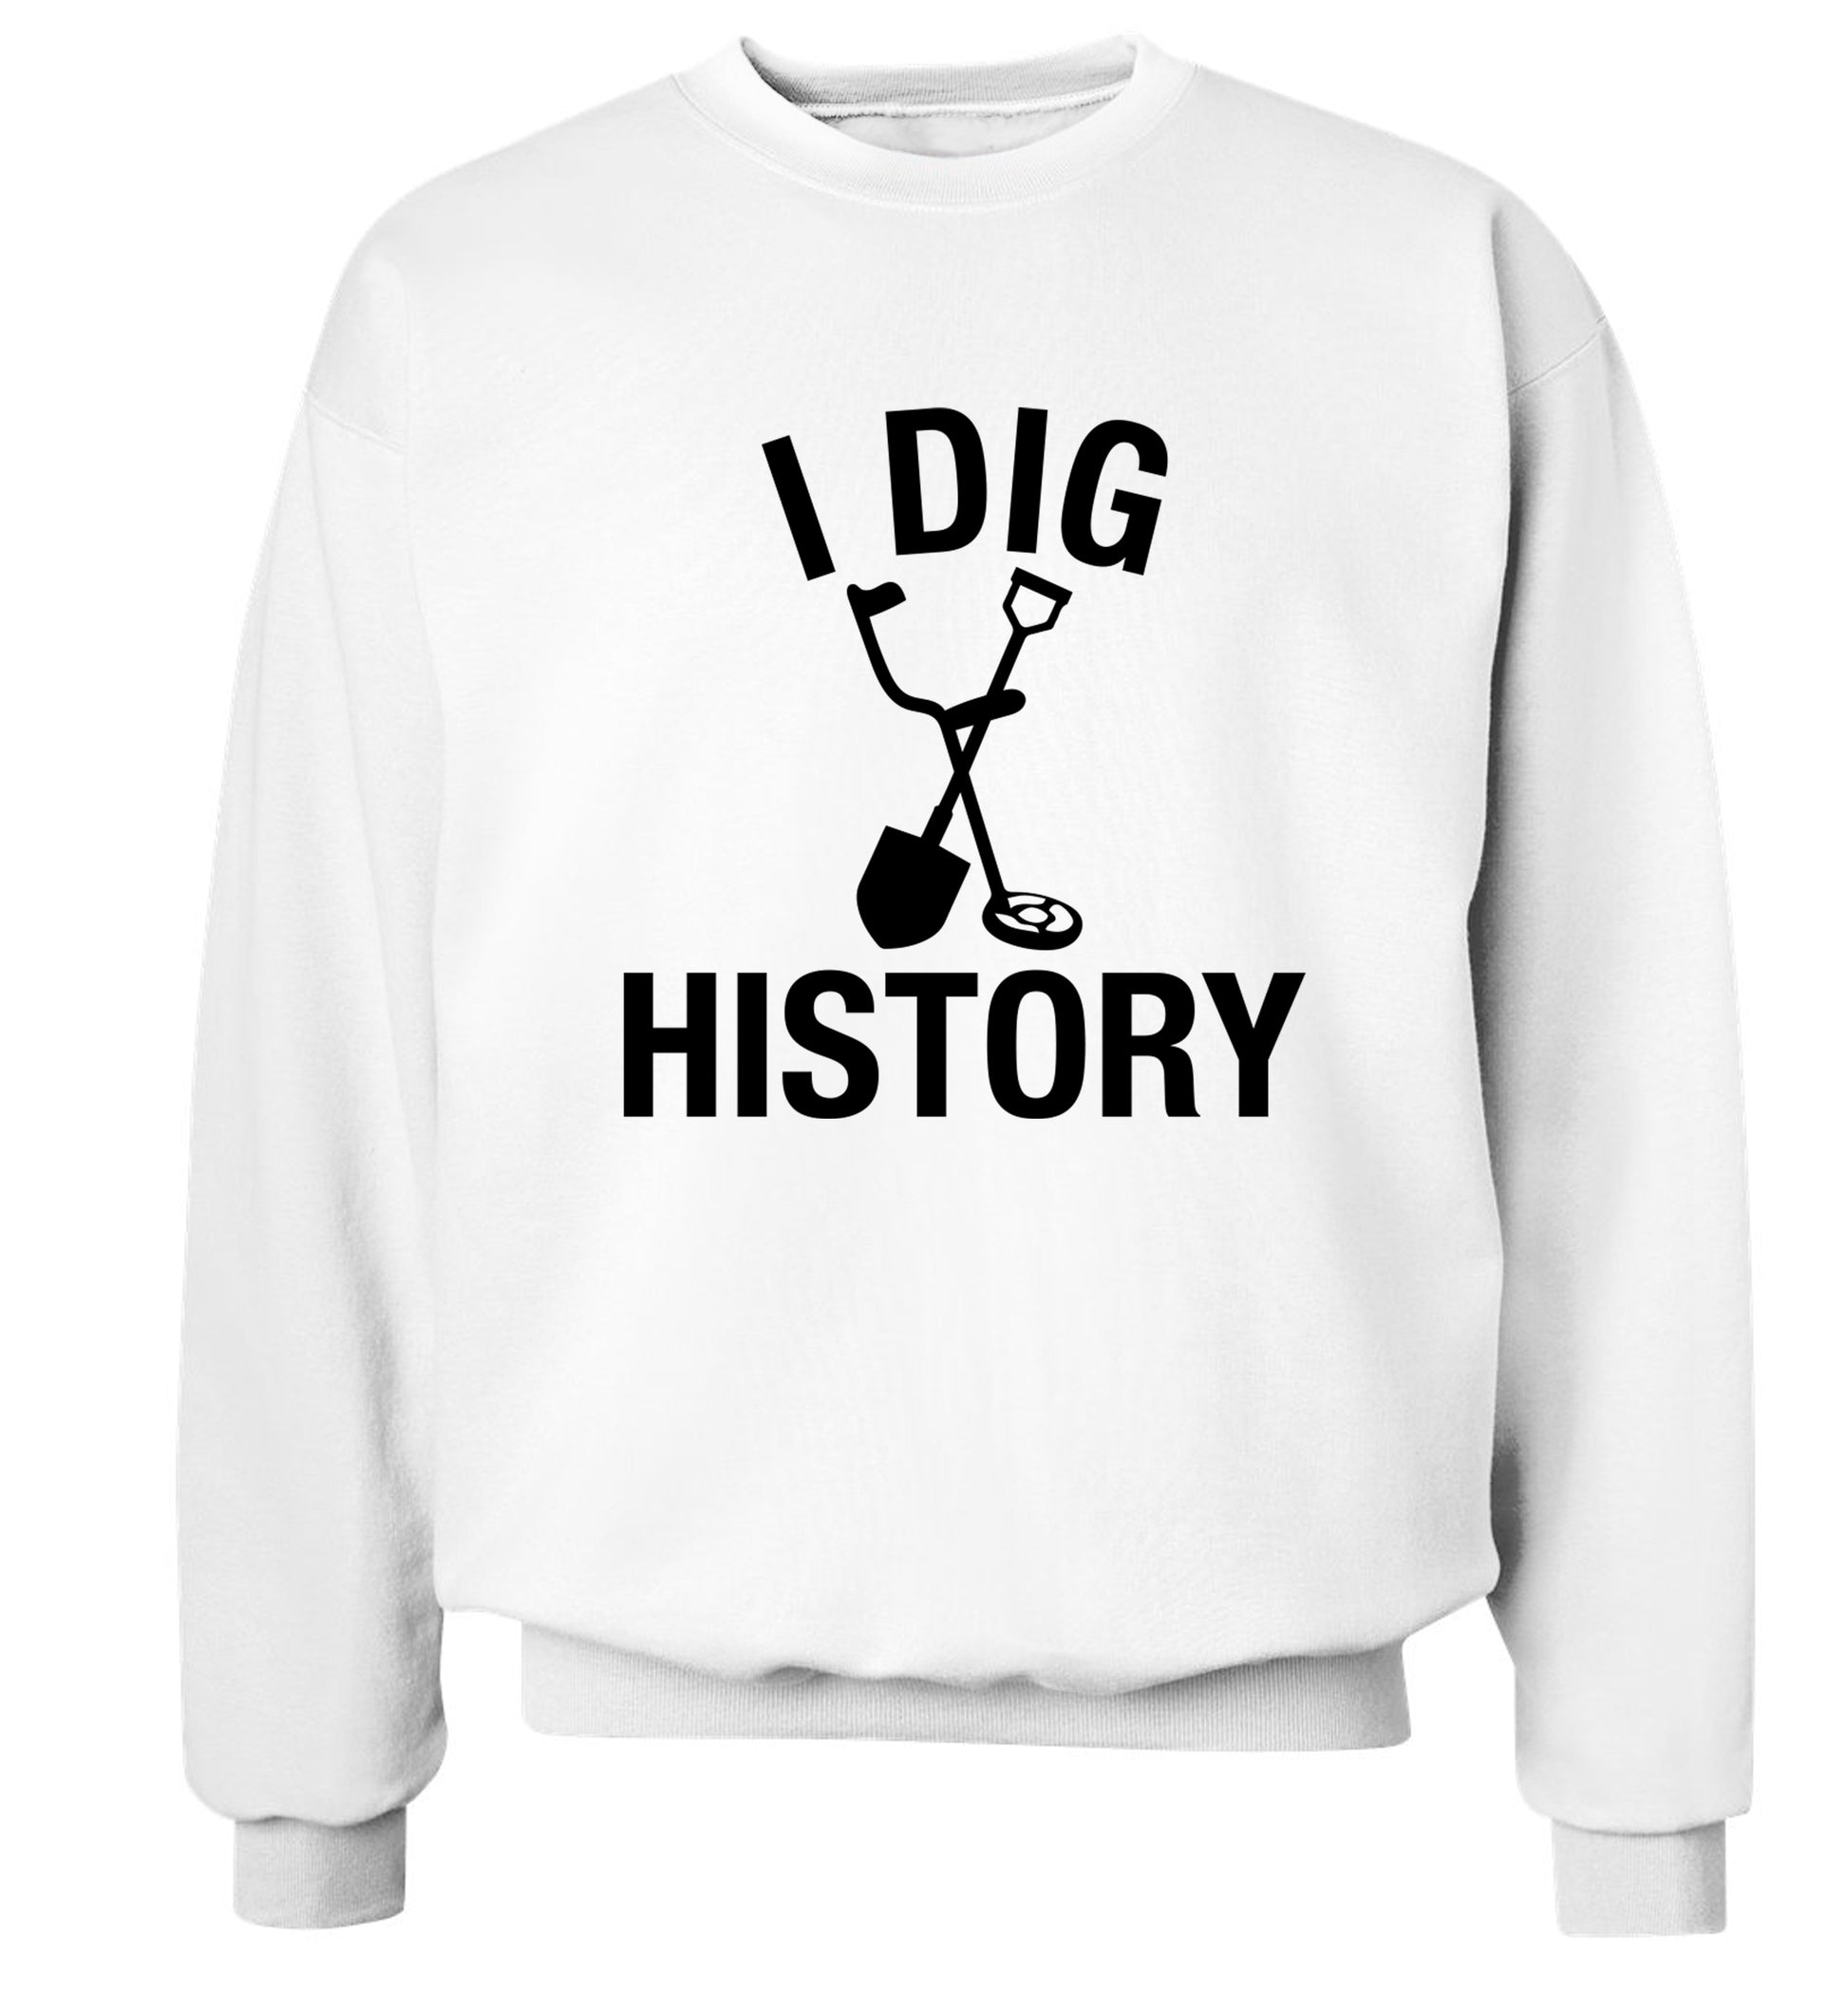 I dig history Adult's unisex white Sweater 2XL